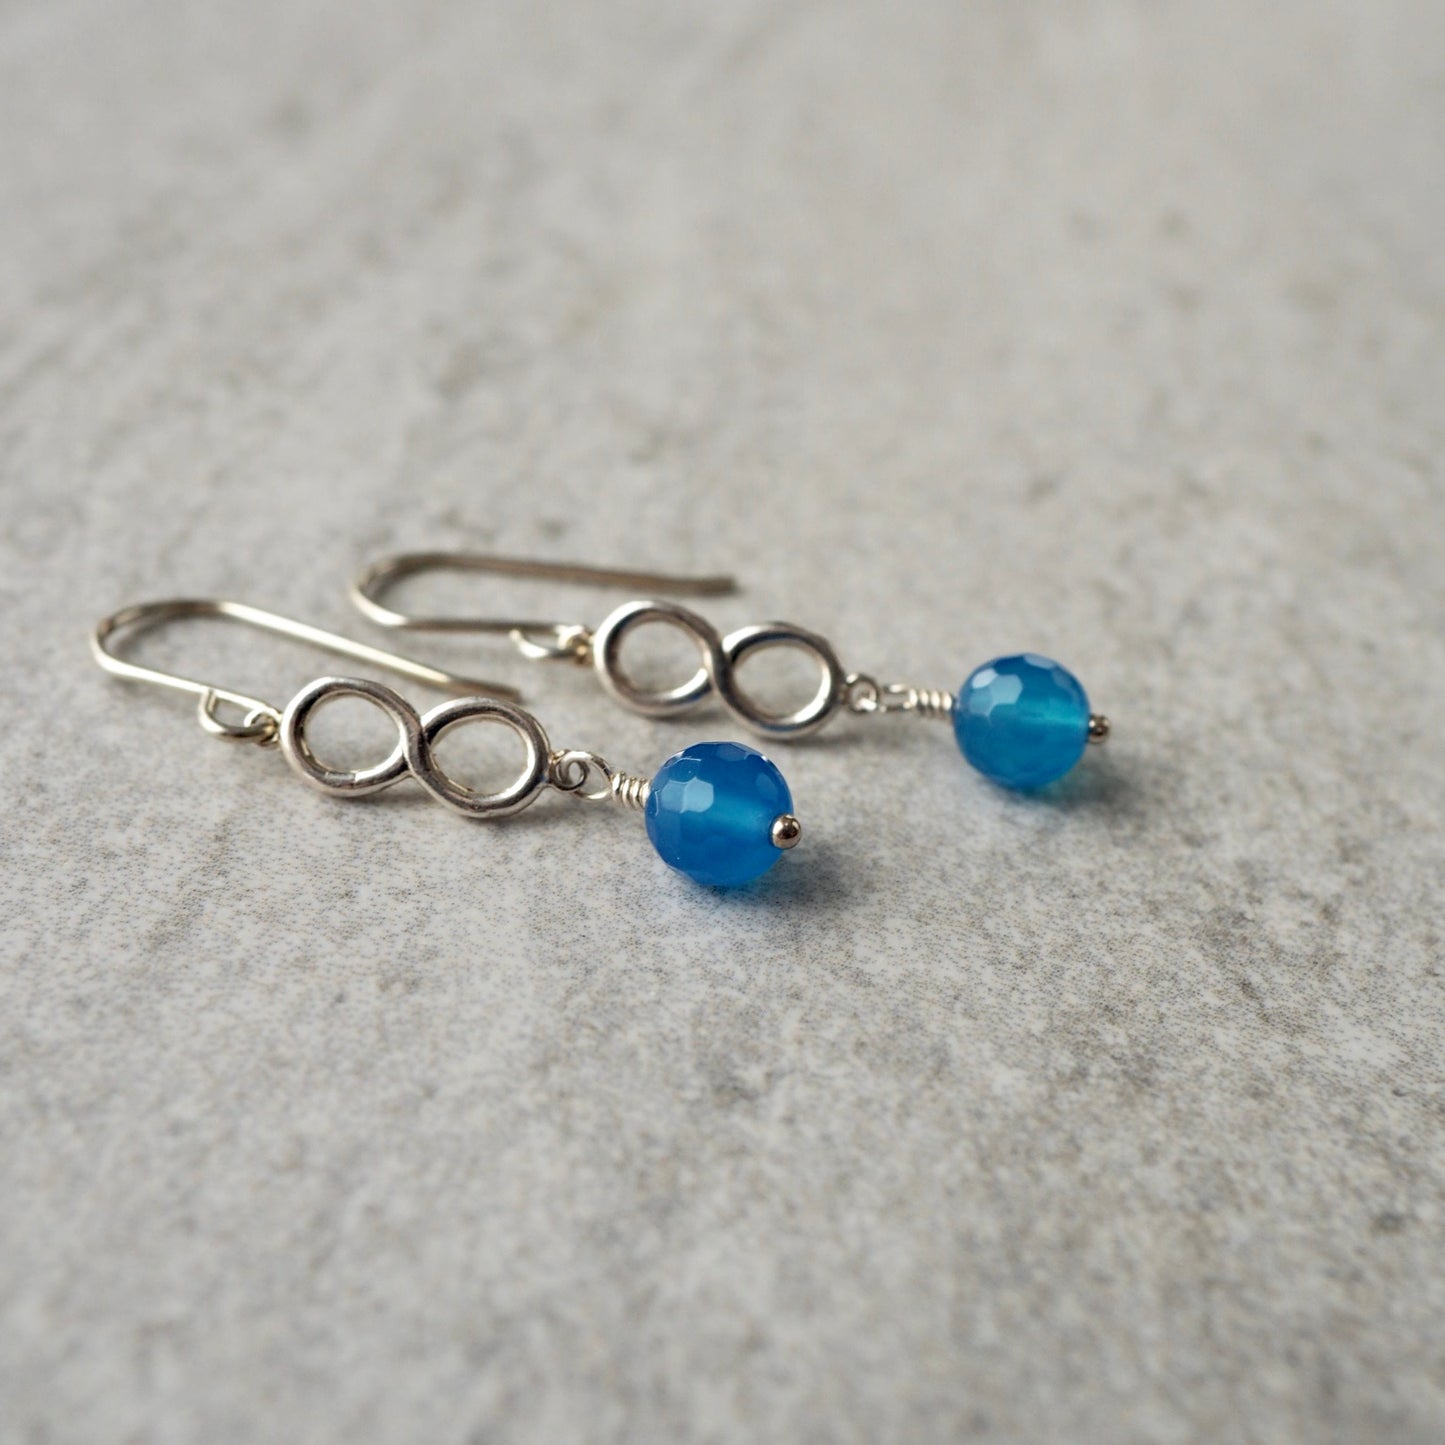 Blue Agate Silver Infinity Earrings made in Canada